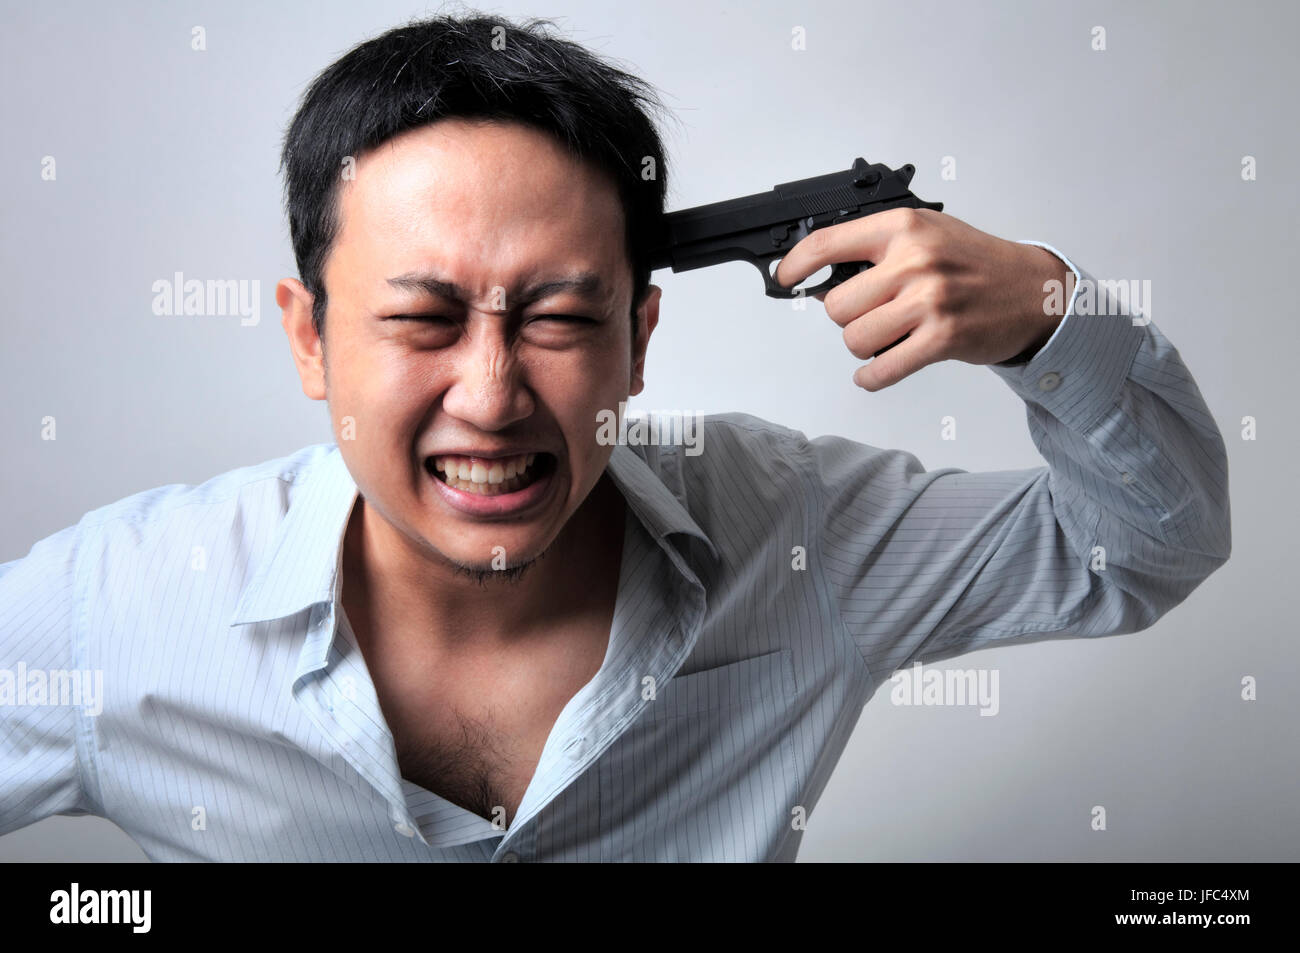 Asian businessman pointing a gun on his head, isolated on grey background. Stock Photo